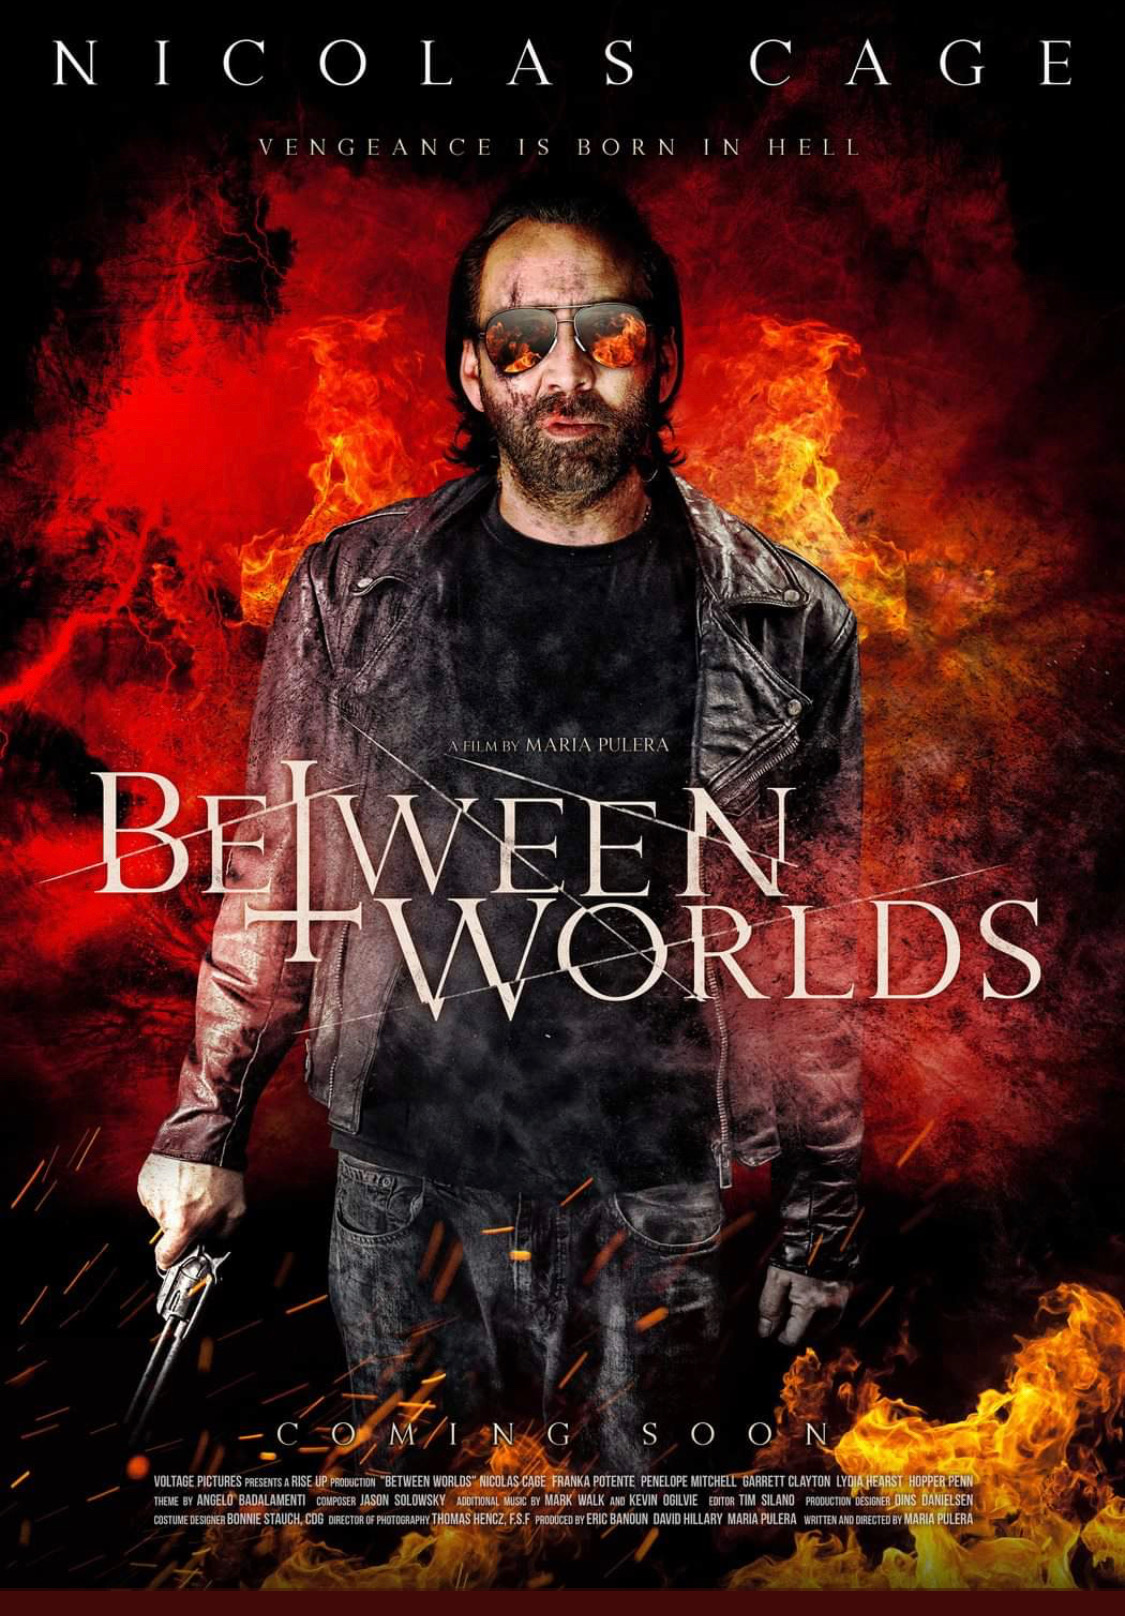 Nicolas Cage Porn Movie - Film Review: Nicolas Cage engages in 'supernatural soft porn' in 'Between  Worlds'